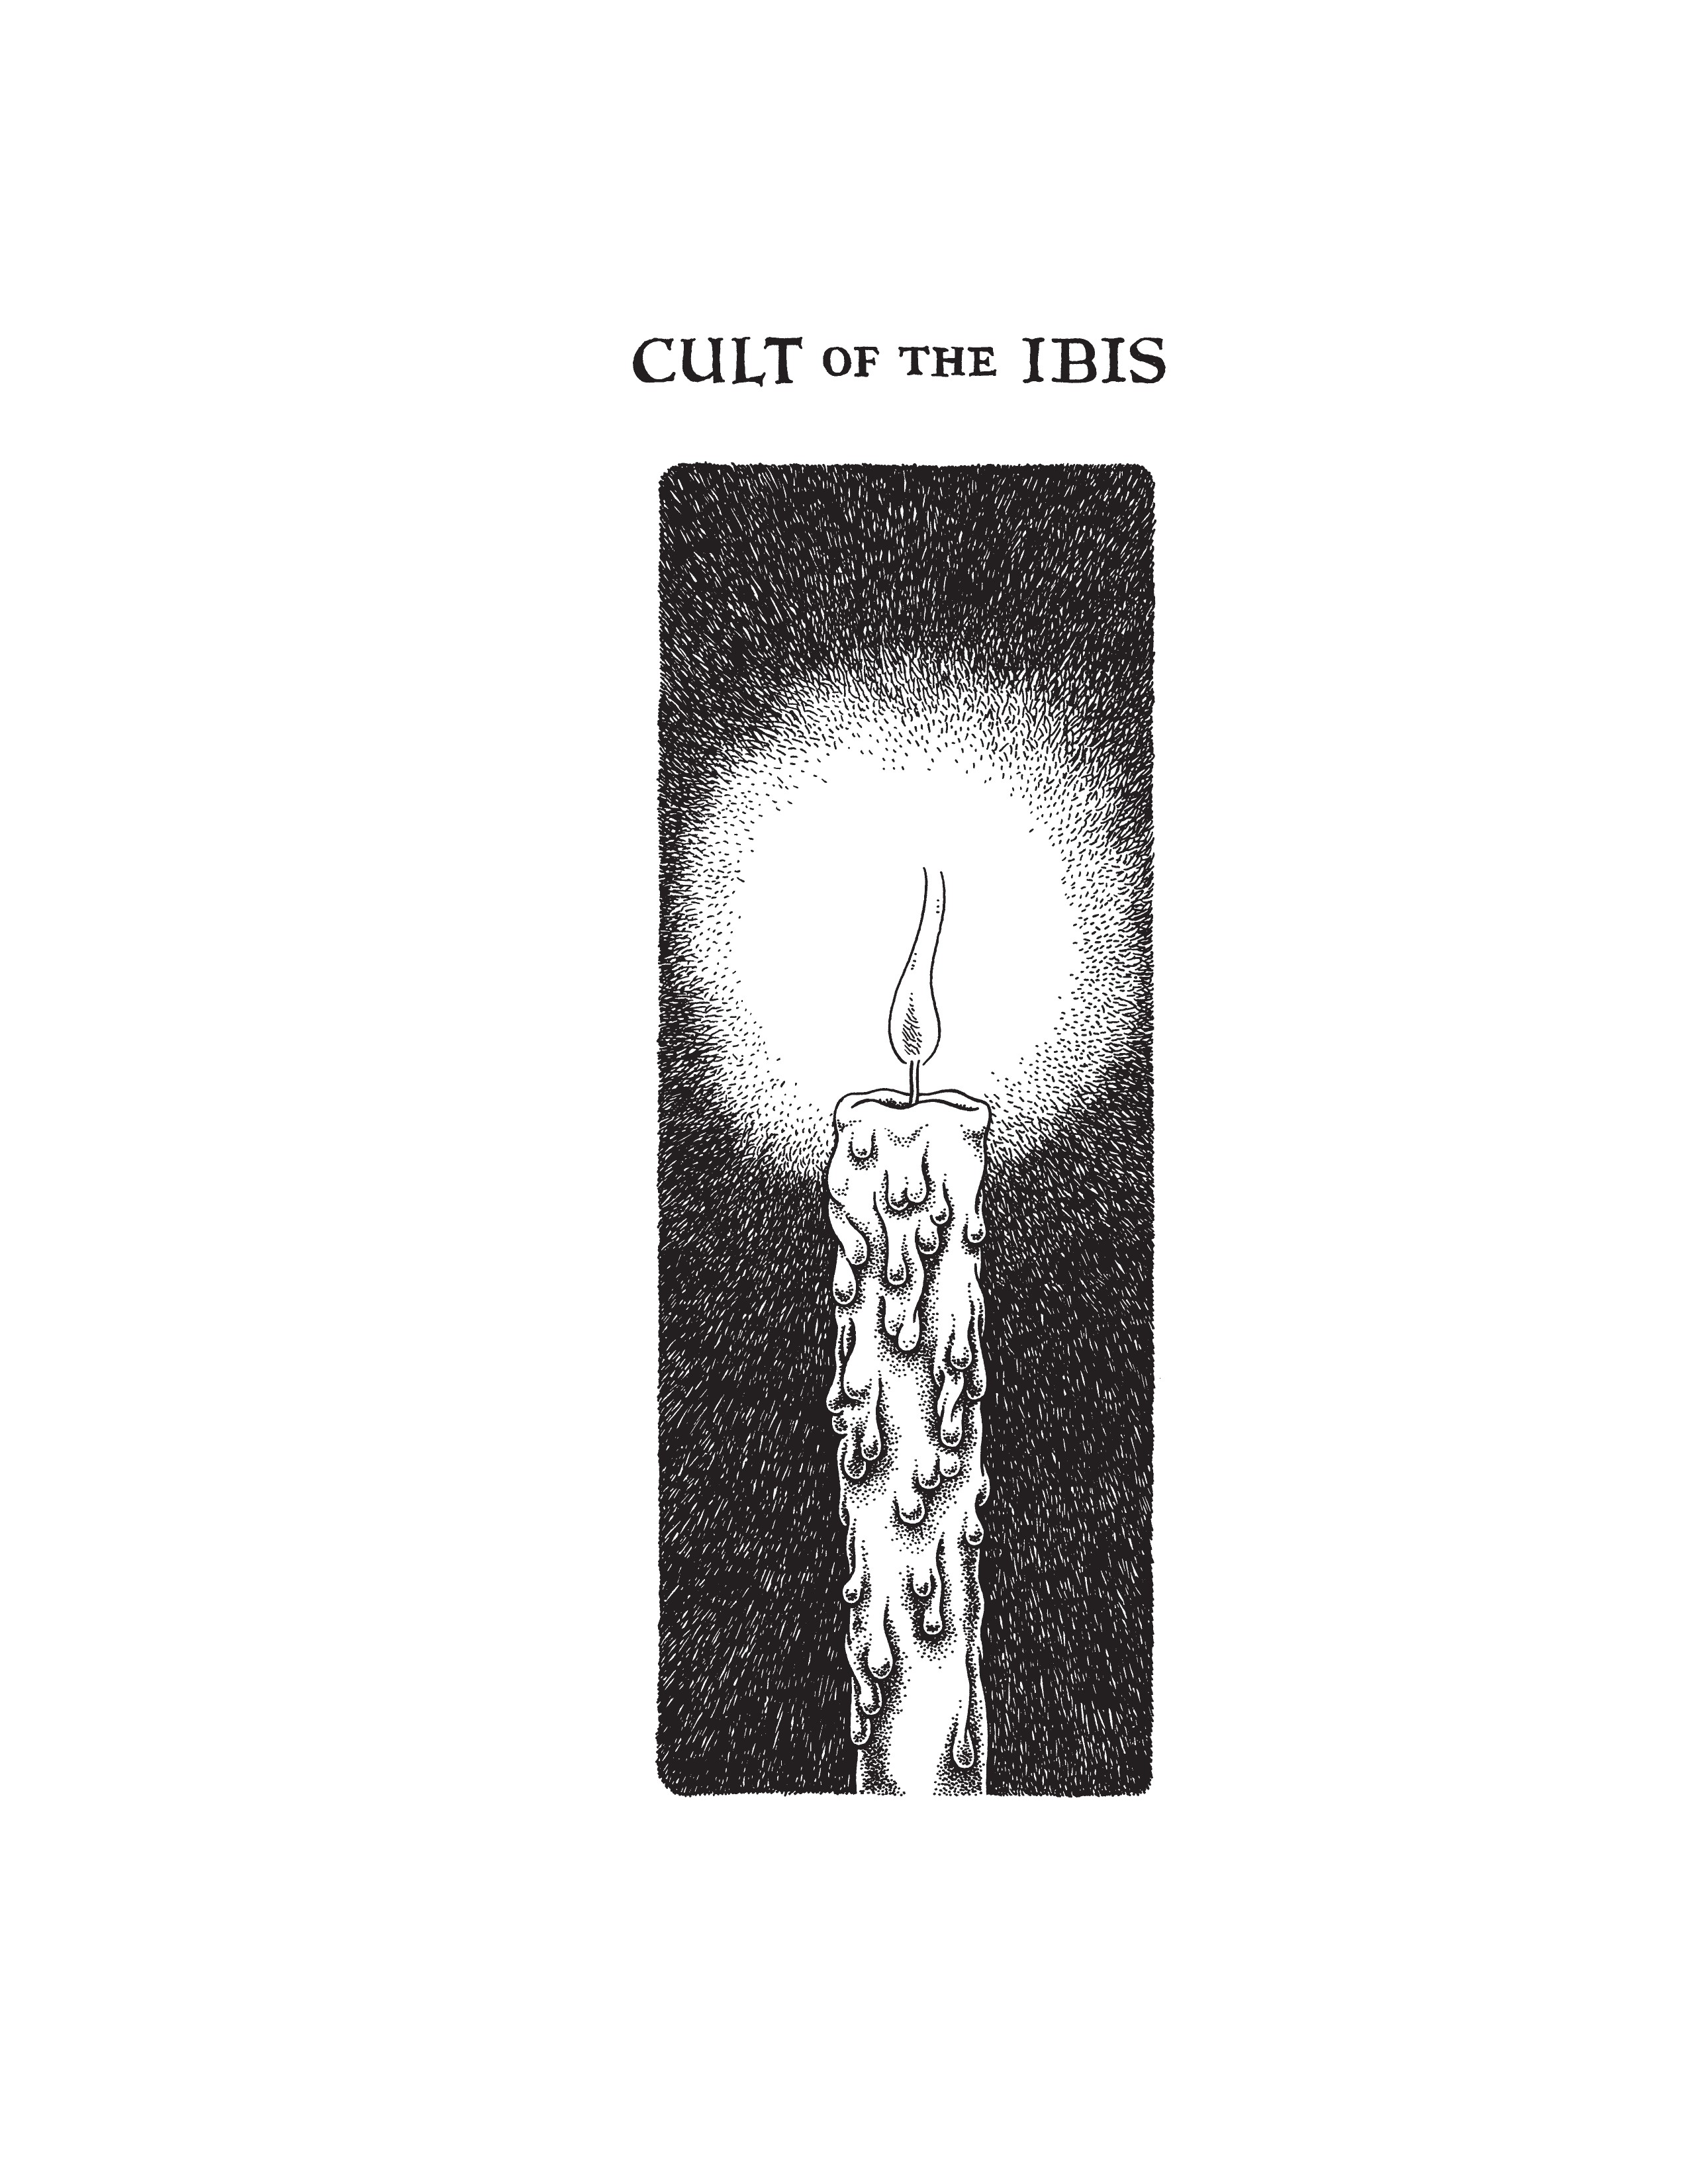 Read online Cult of the Ibis comic -  Issue # TPB (Part 1) - 2